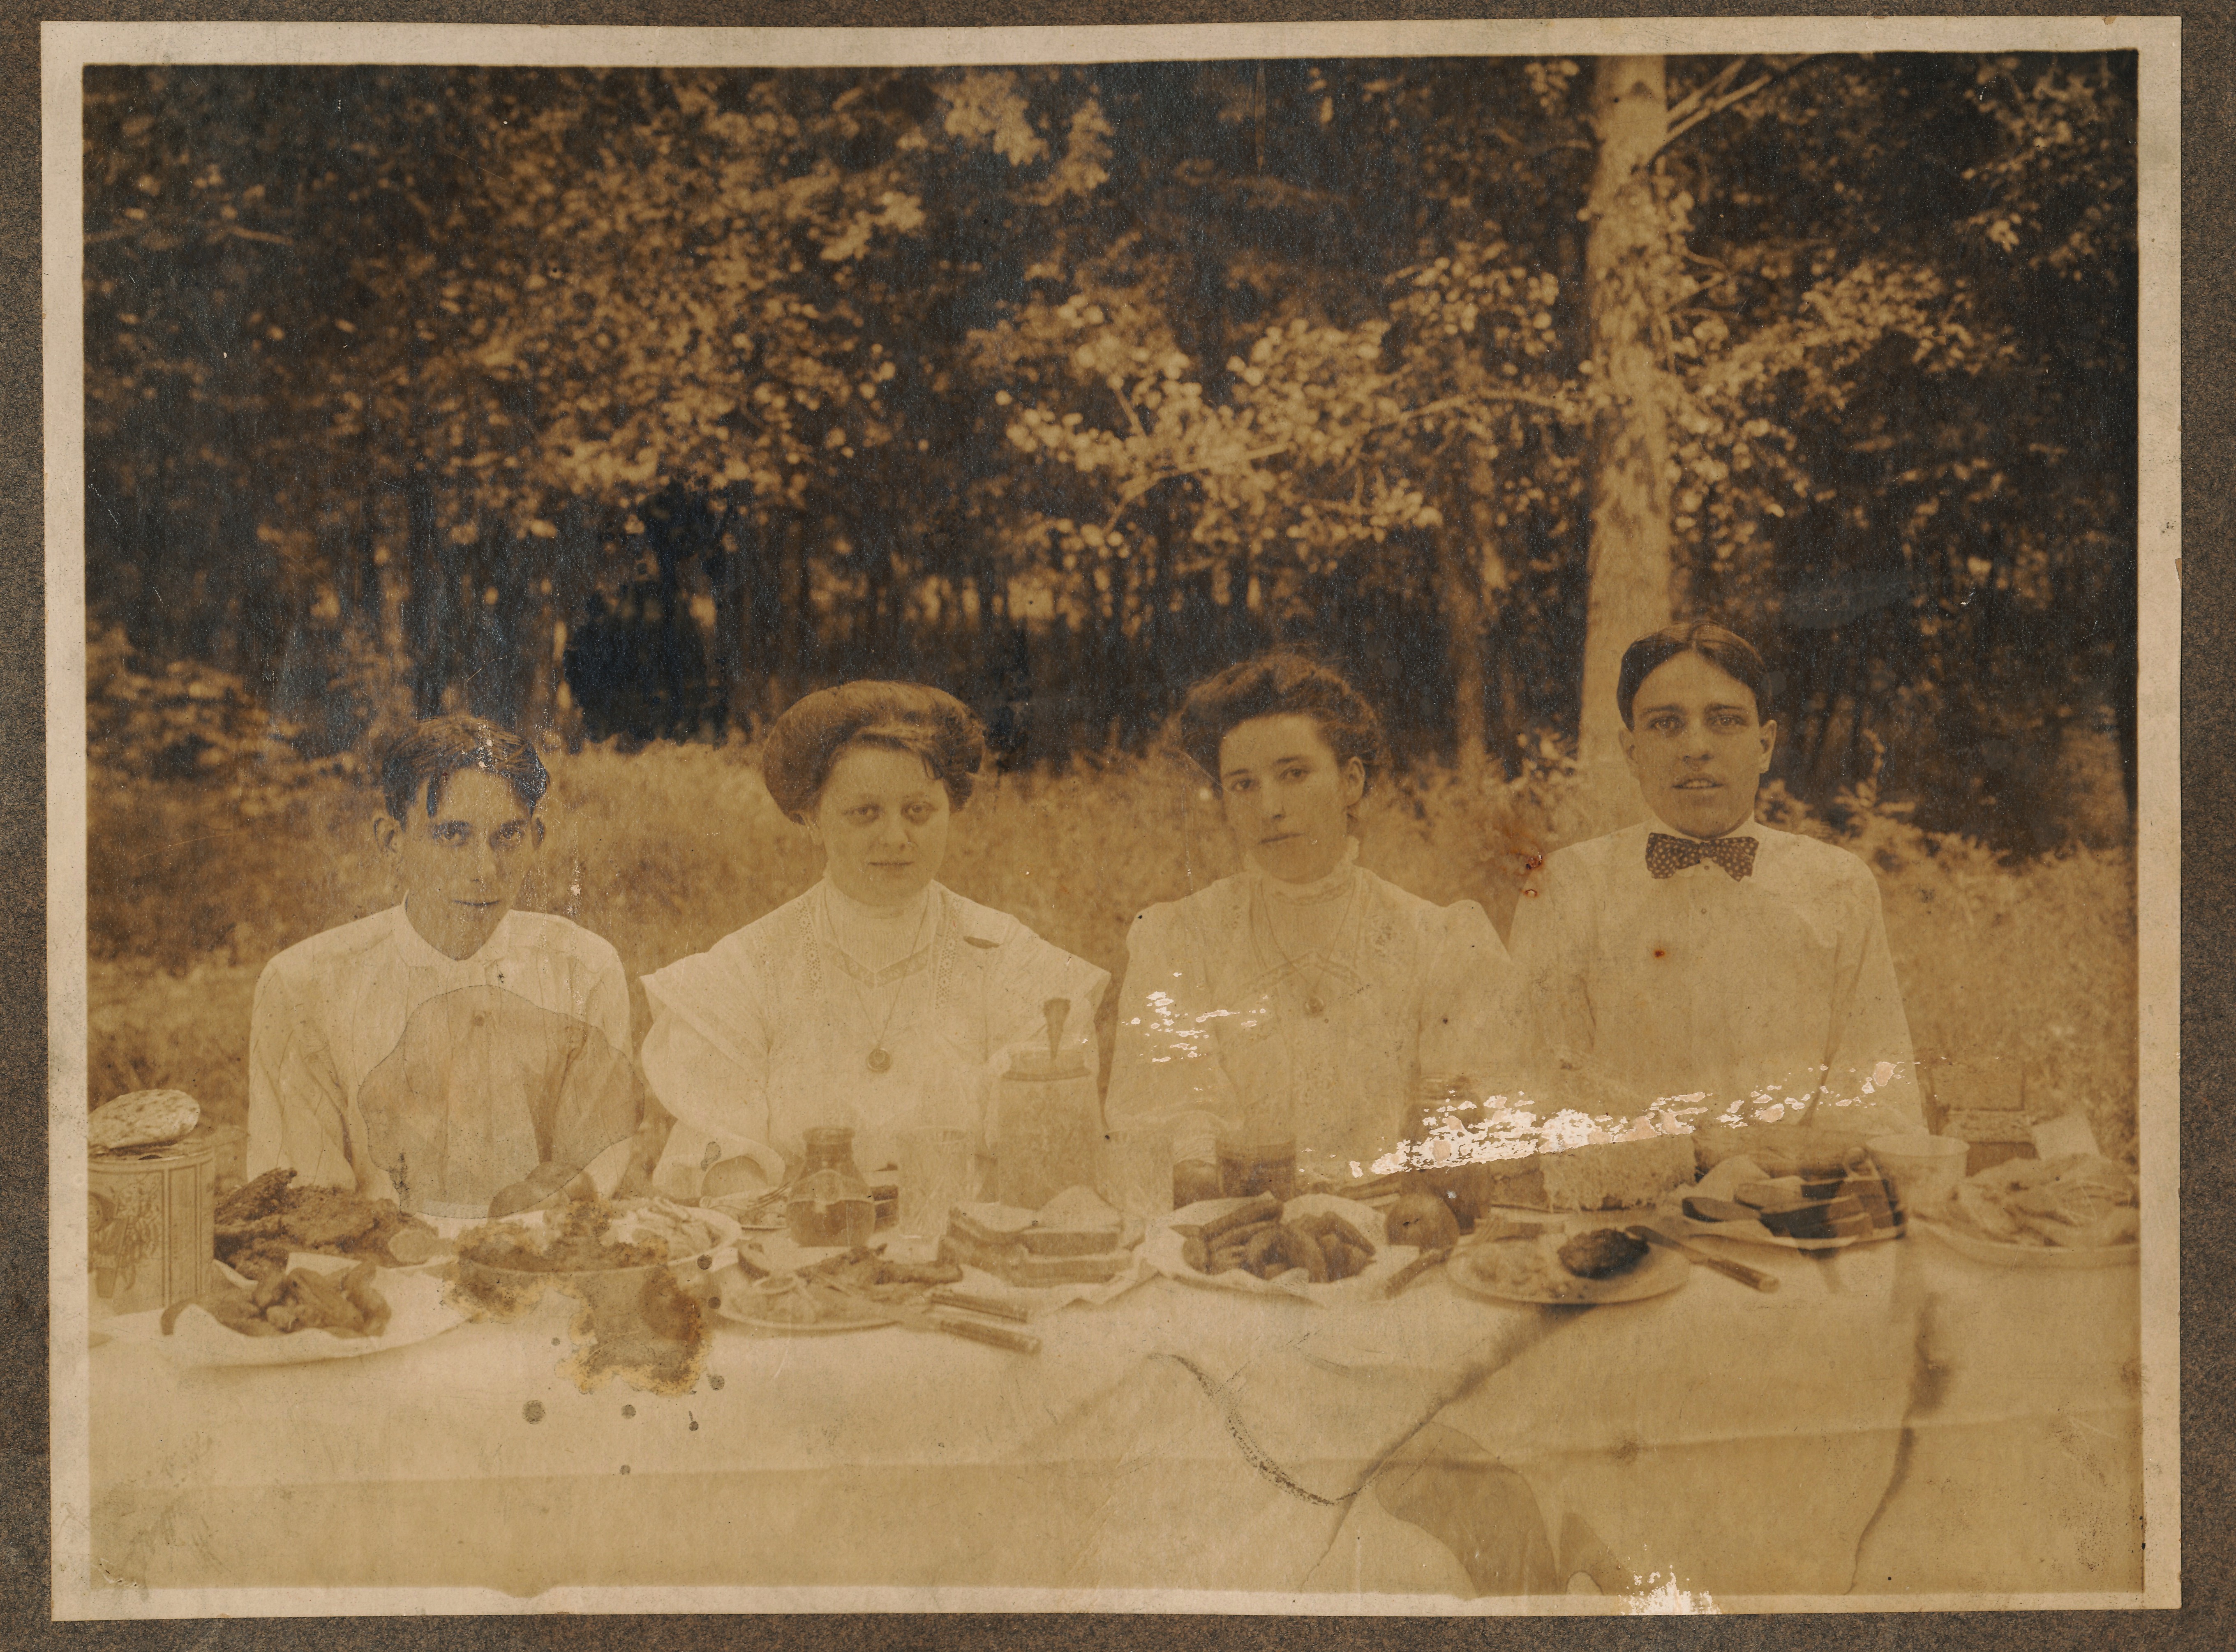 Nellie Landers Riess (probable; third from left) and friends at a picnic.